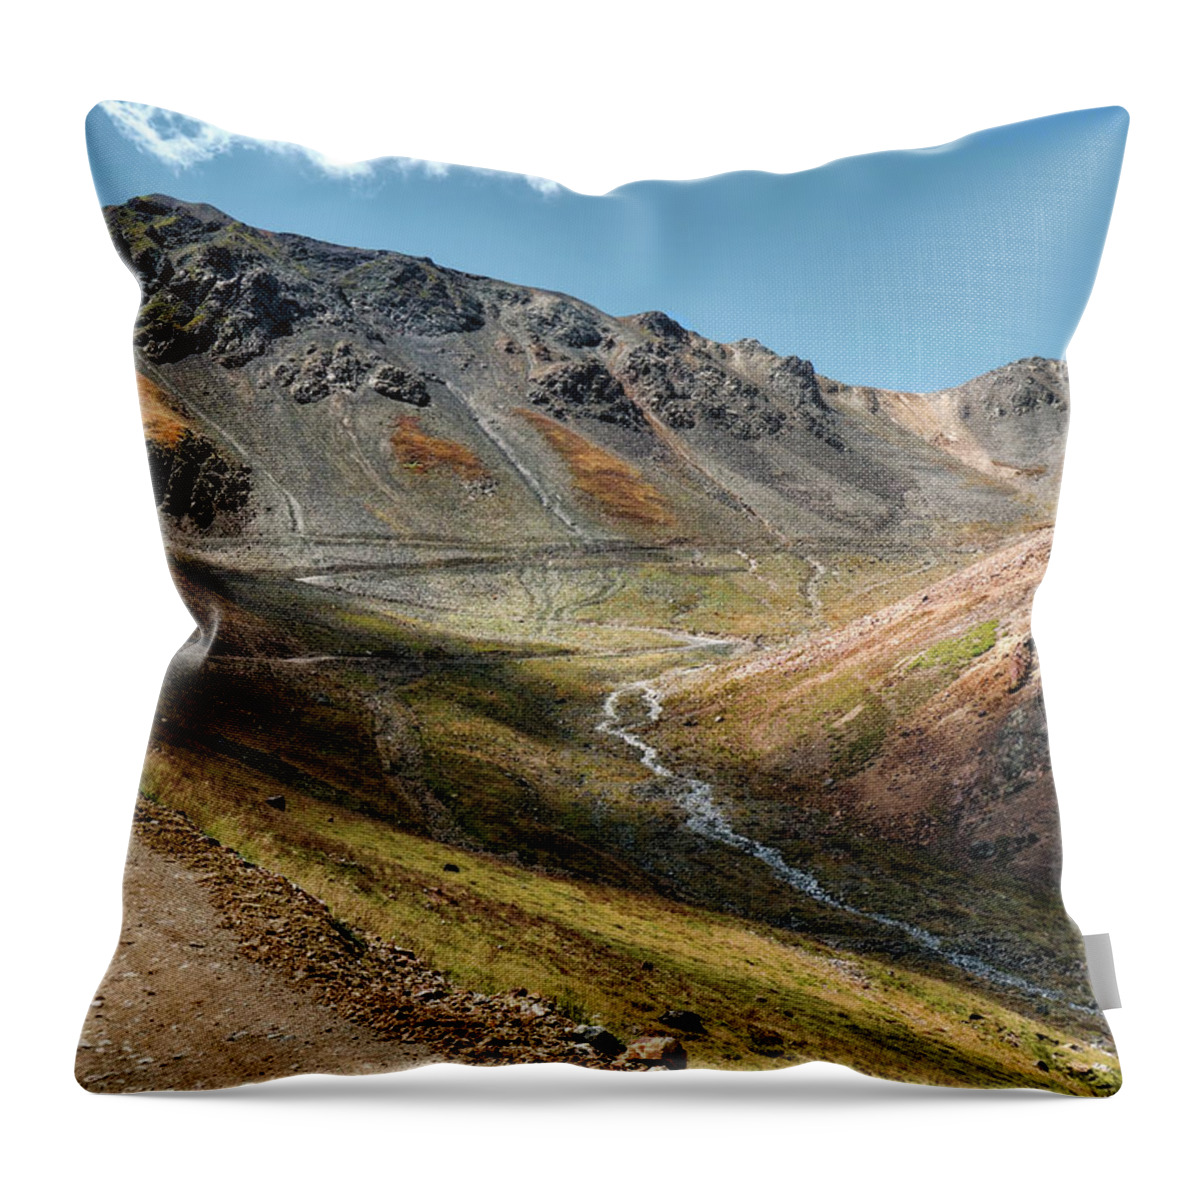 California Pass Throw Pillow featuring the photograph Alpine Tundra by Jim Hill